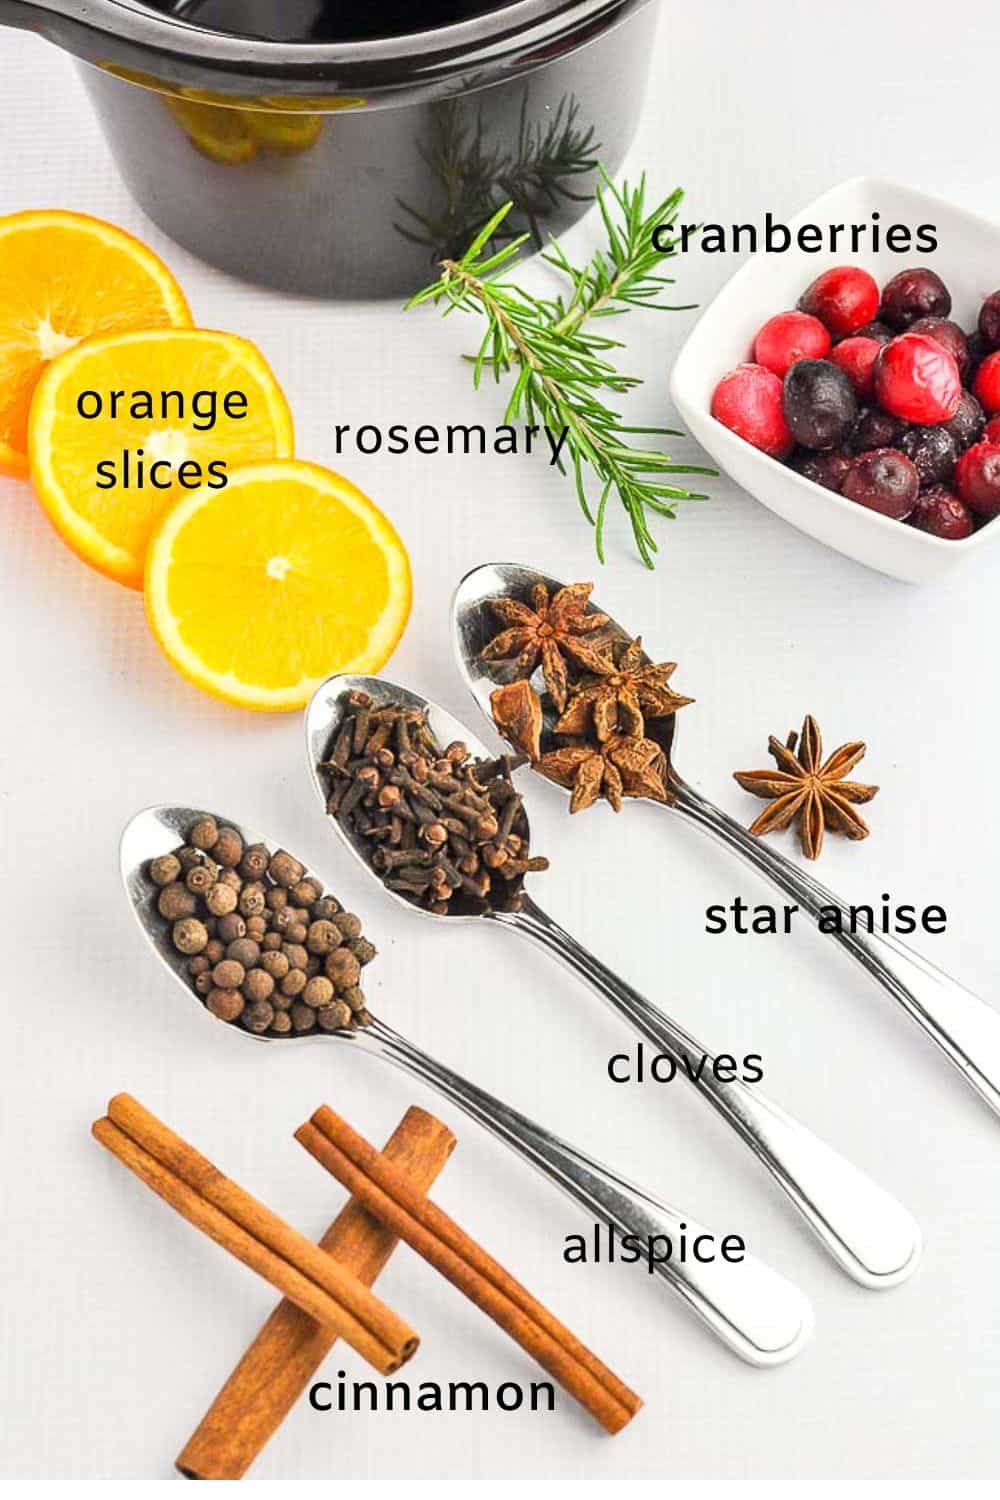 Labelled ingredients for simmering holiday spice mix.